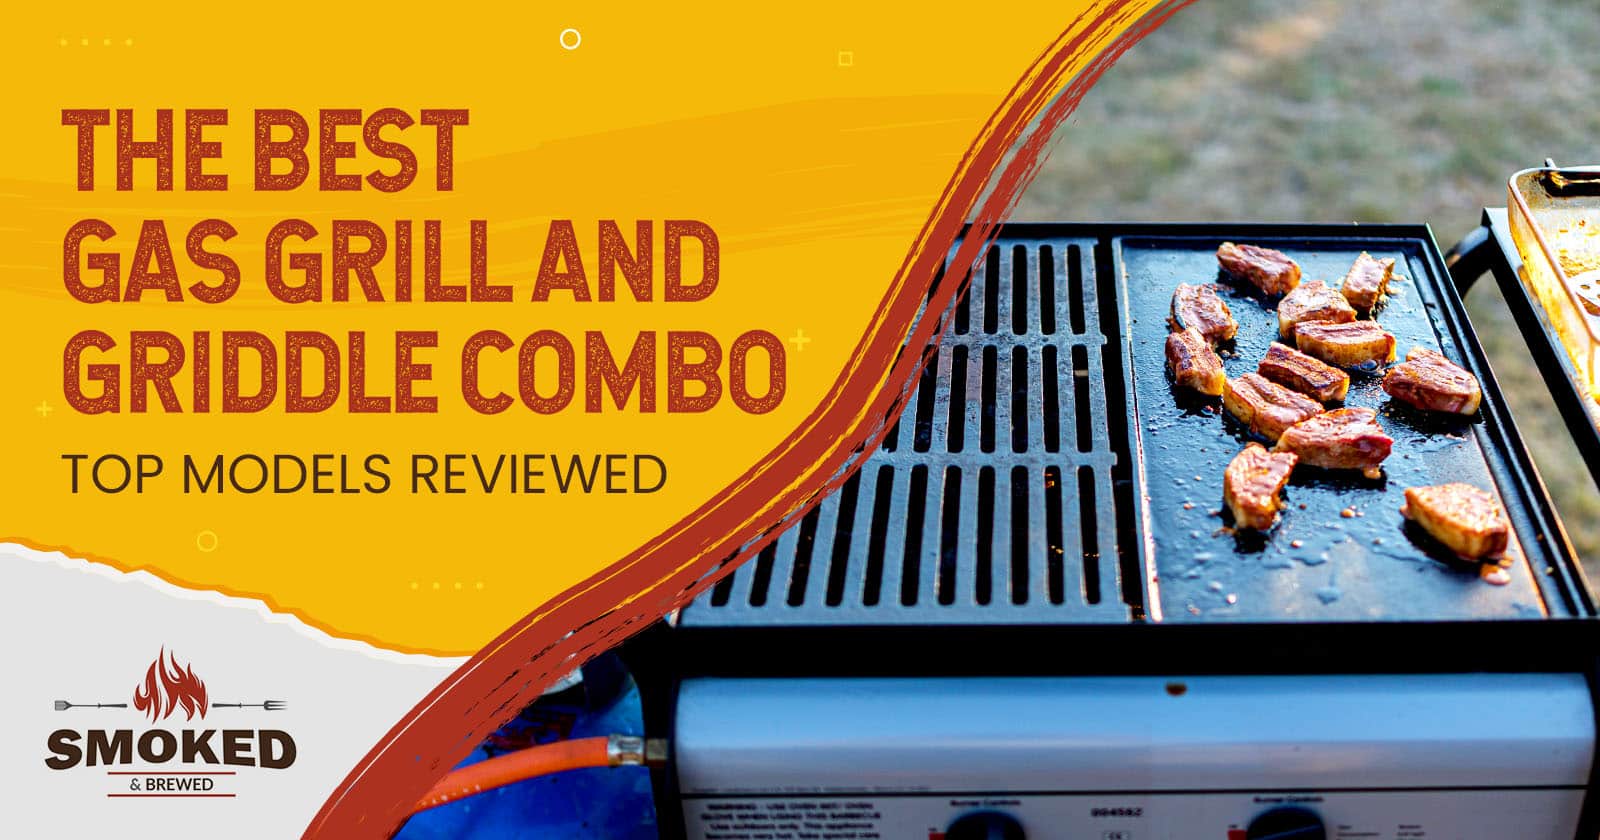 The Best Gas Grill and Griddle Combo [TOP MODELS REVIEWED]